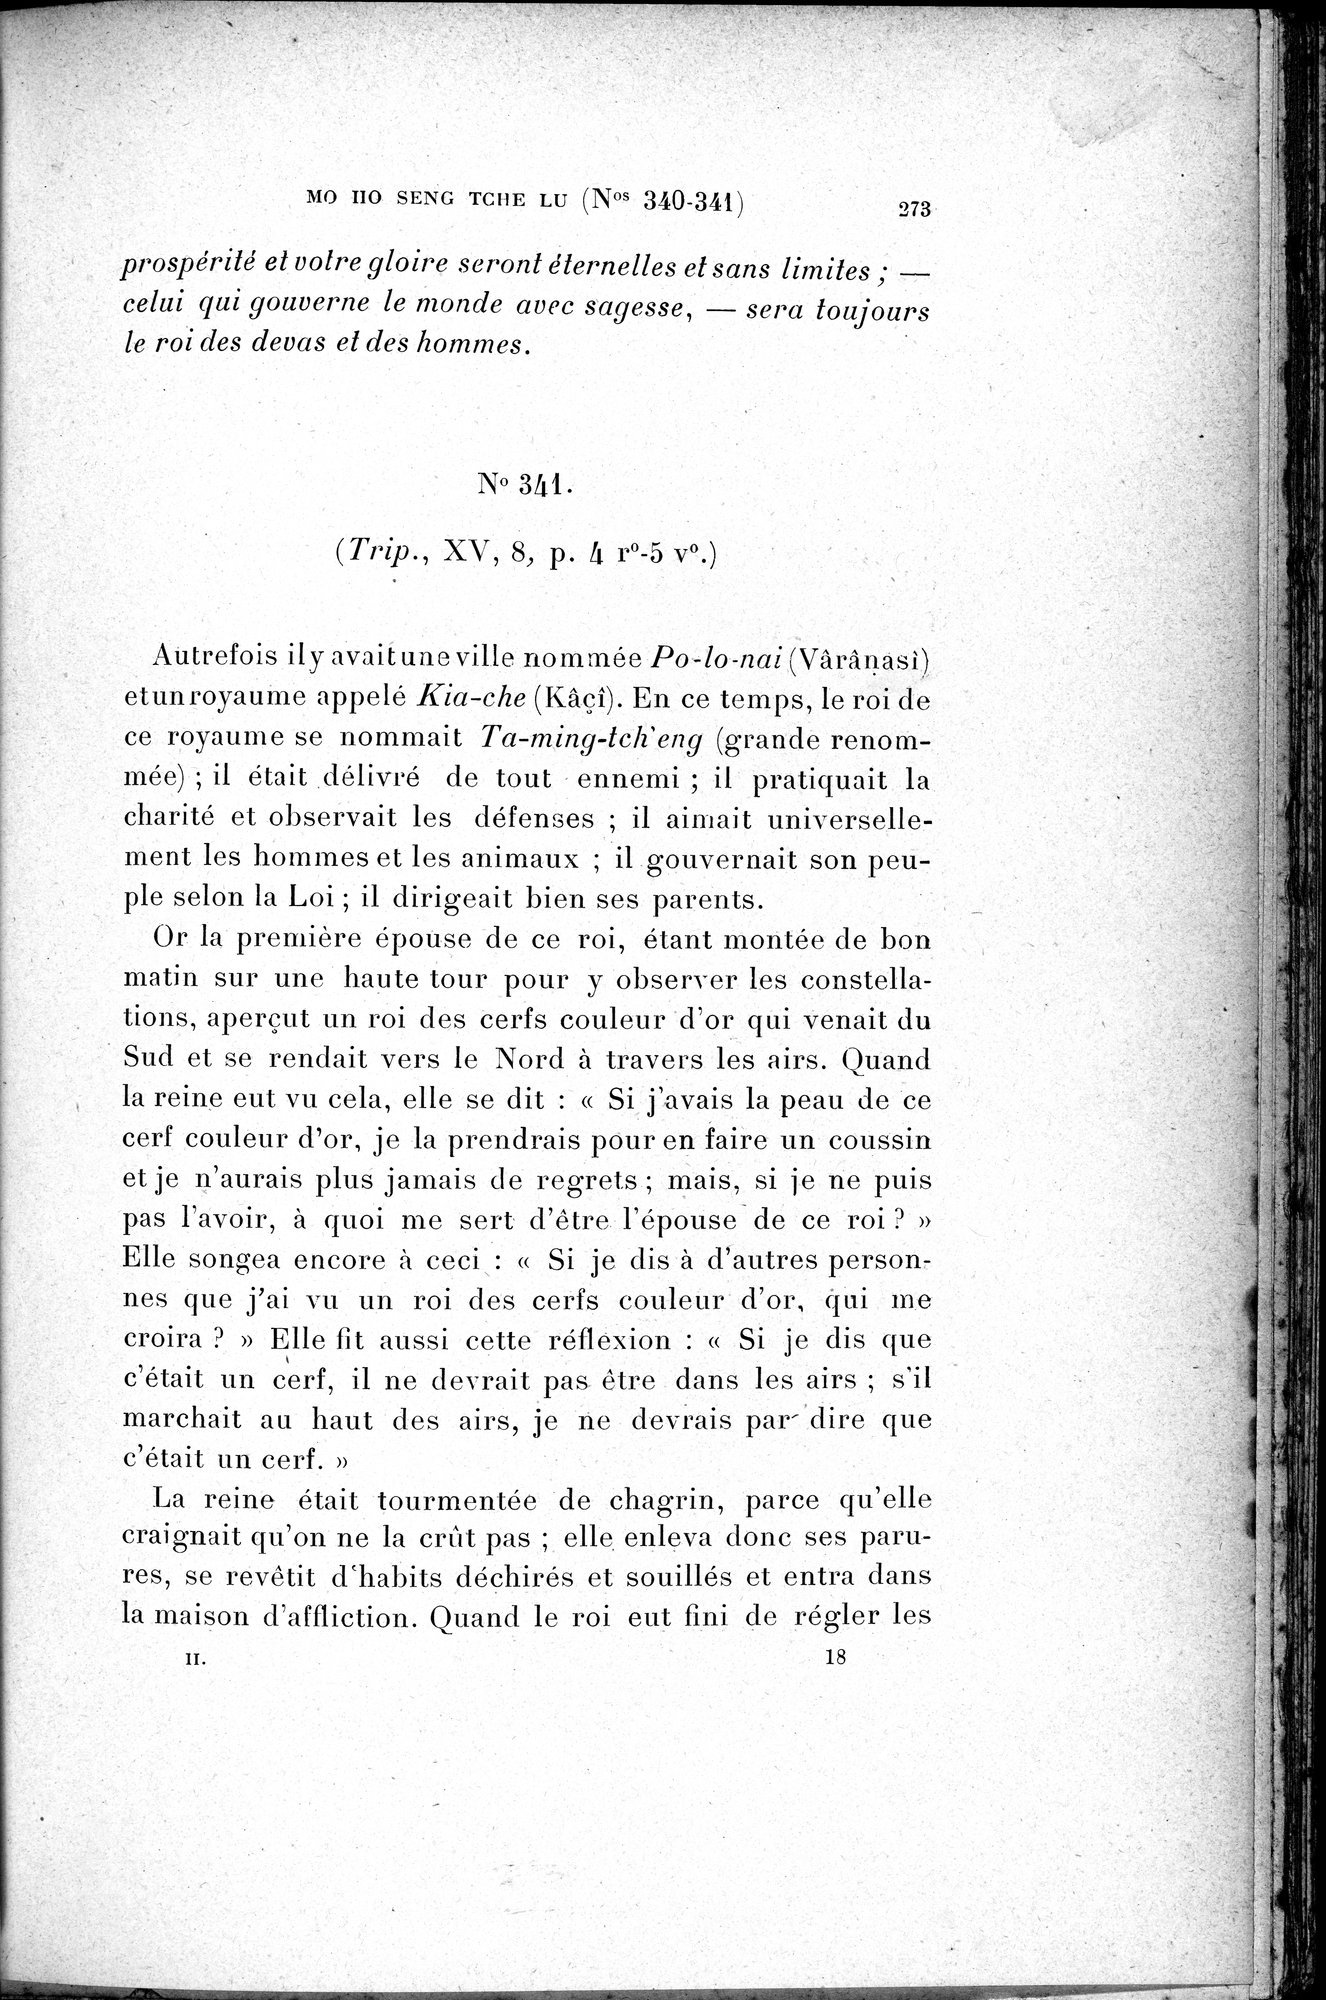 Cinq Cents Contes et Apologues : vol.2 / Page 287 (Grayscale High Resolution Image)